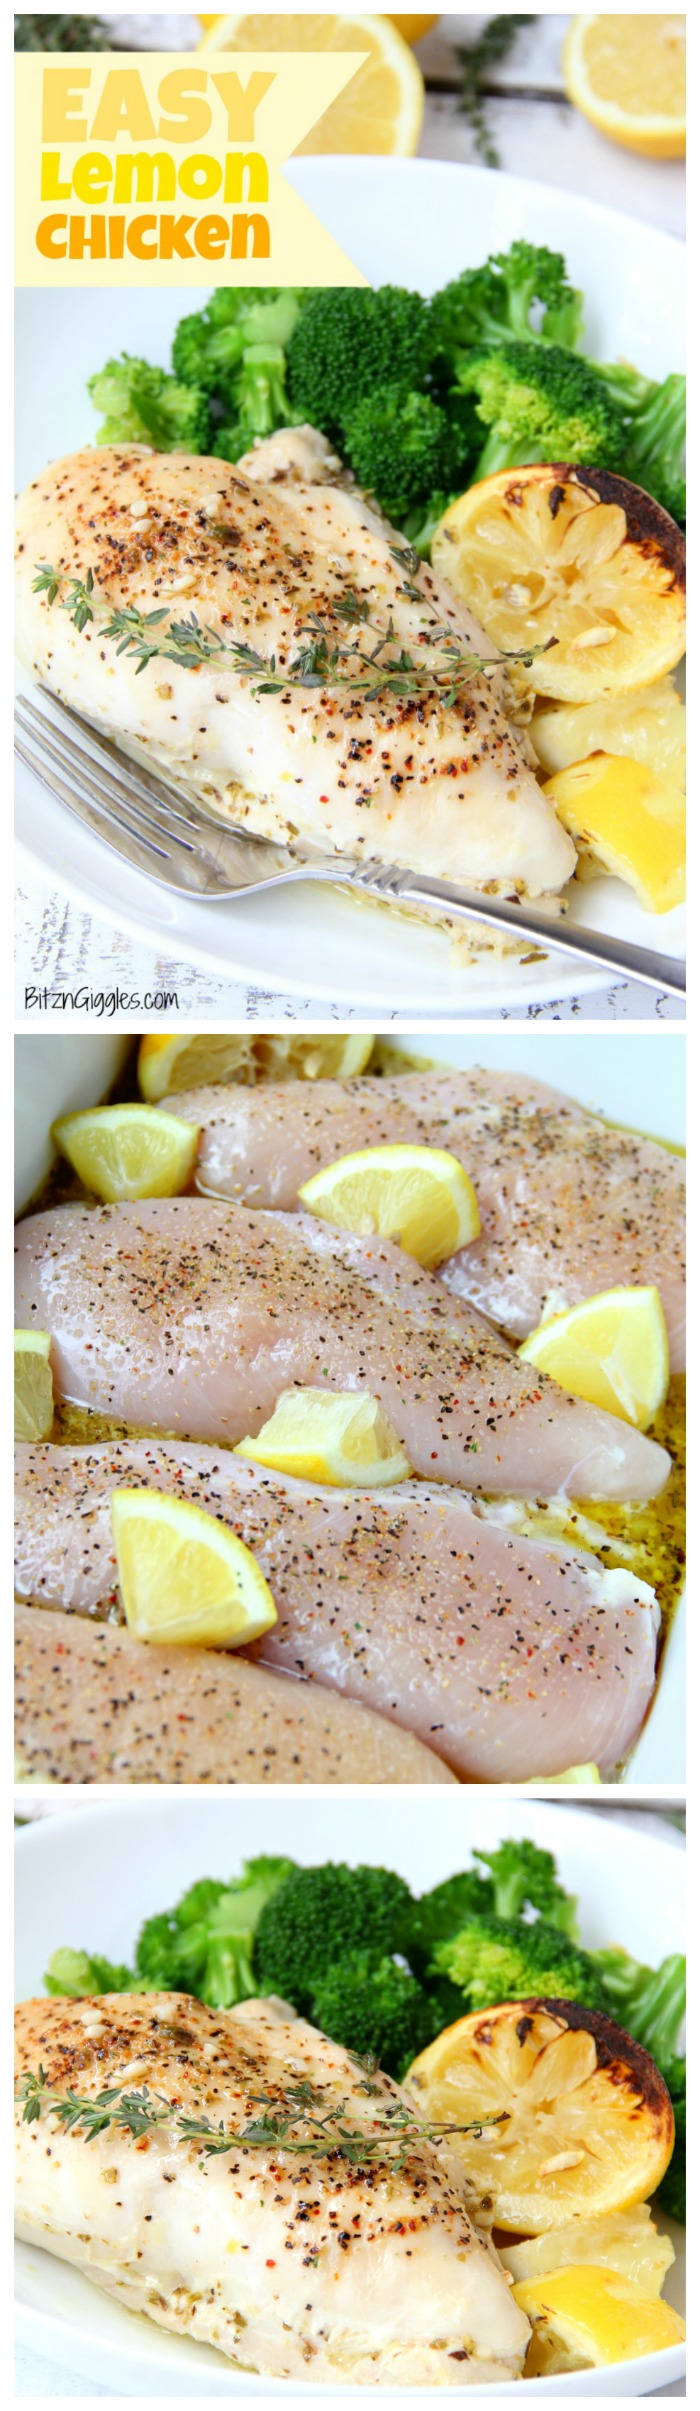 Easy Lemon Chicken - Juicy and tender chicken breasts baked in a lemon-herb sauce brimming with delicious lemony flavor!